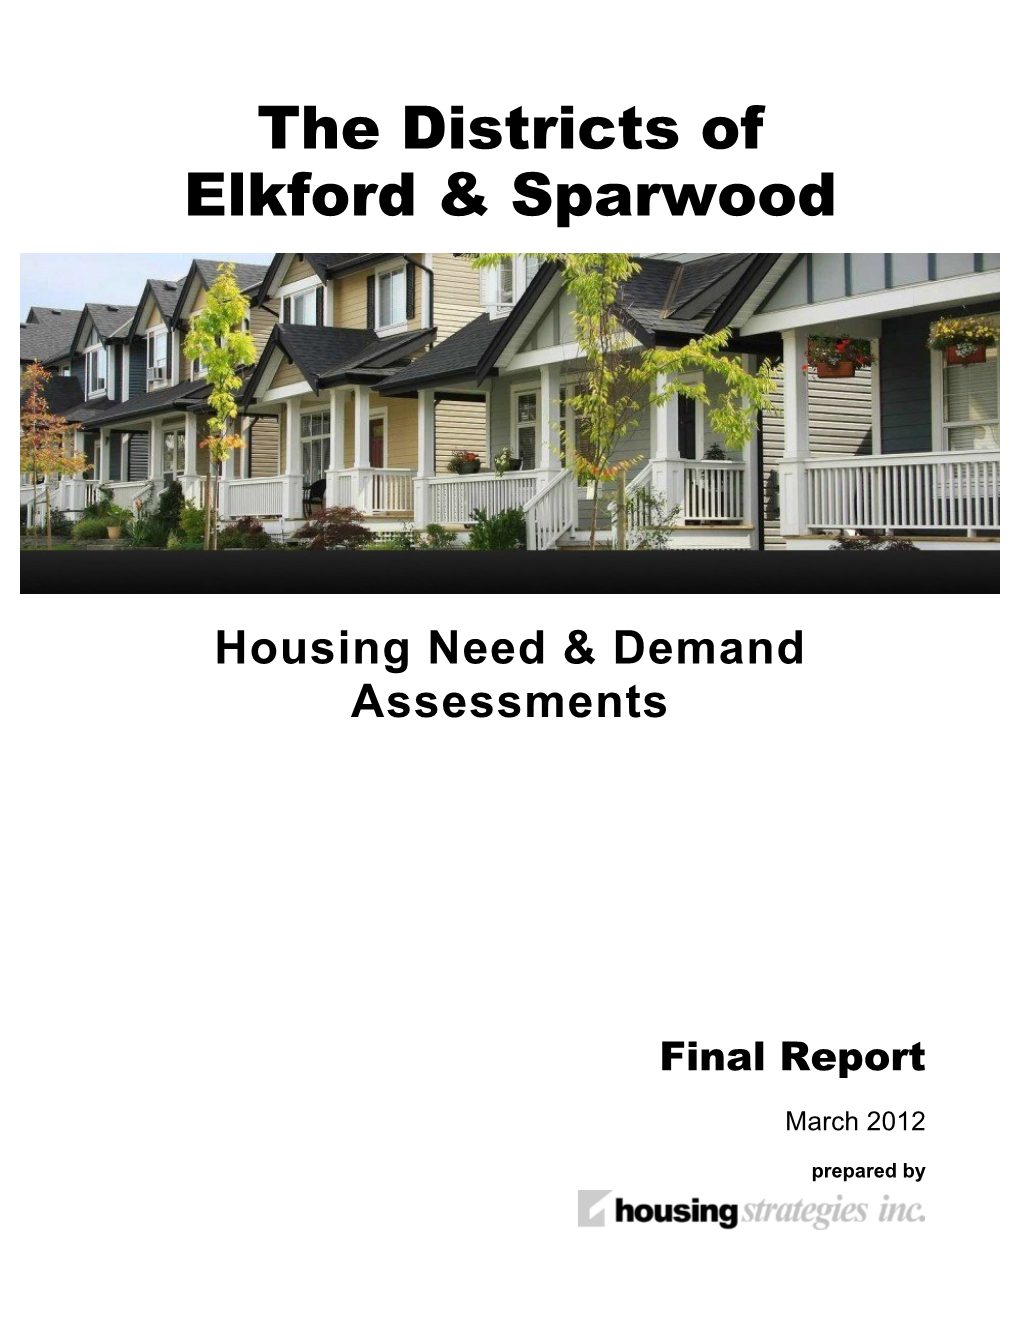 Elkford & Sparwood Housing Need and Demand Assessment